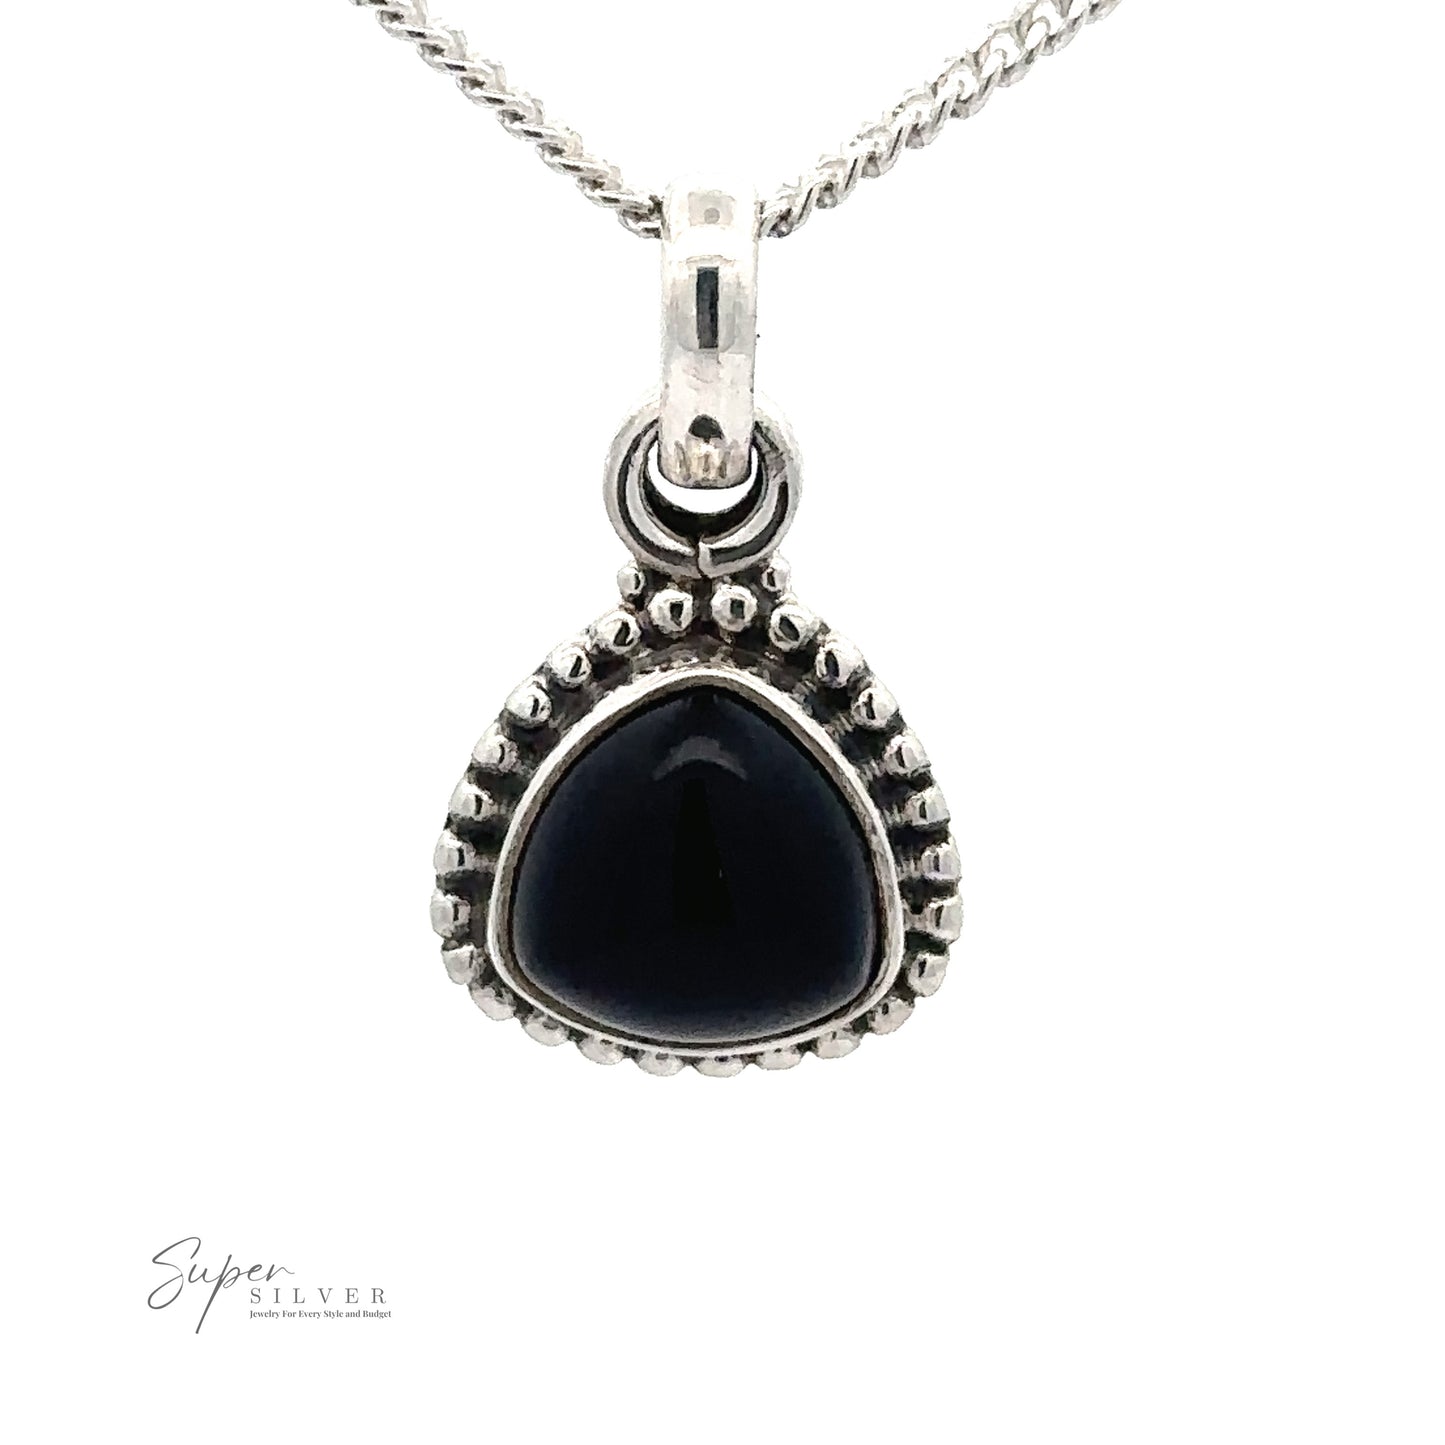 
                  
                    A Beautiful Triangular Shape Stone Pendant With Beaded Design, featuring a beaded design border. The pendant is suspended from a chain, and the label "Super Silver" is seen in the bottom left corner.
                  
                